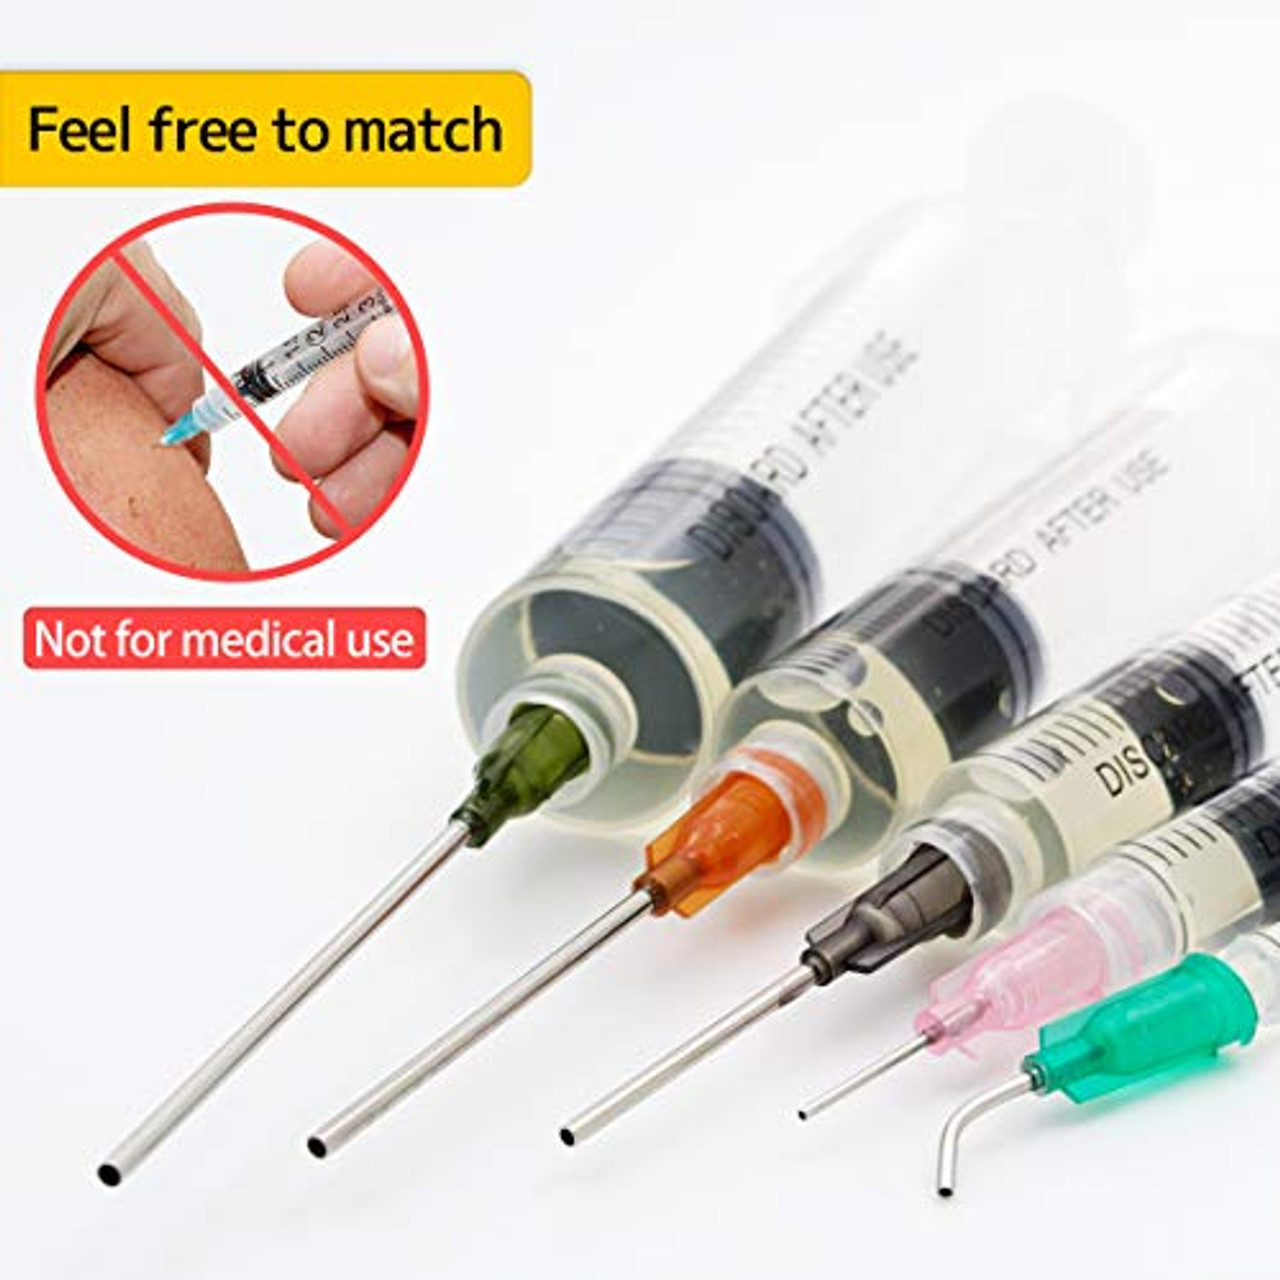 21g, 1.5 Needle - 5cc/5ml Syringe - Syringes with Needles - Clinical  Disposables